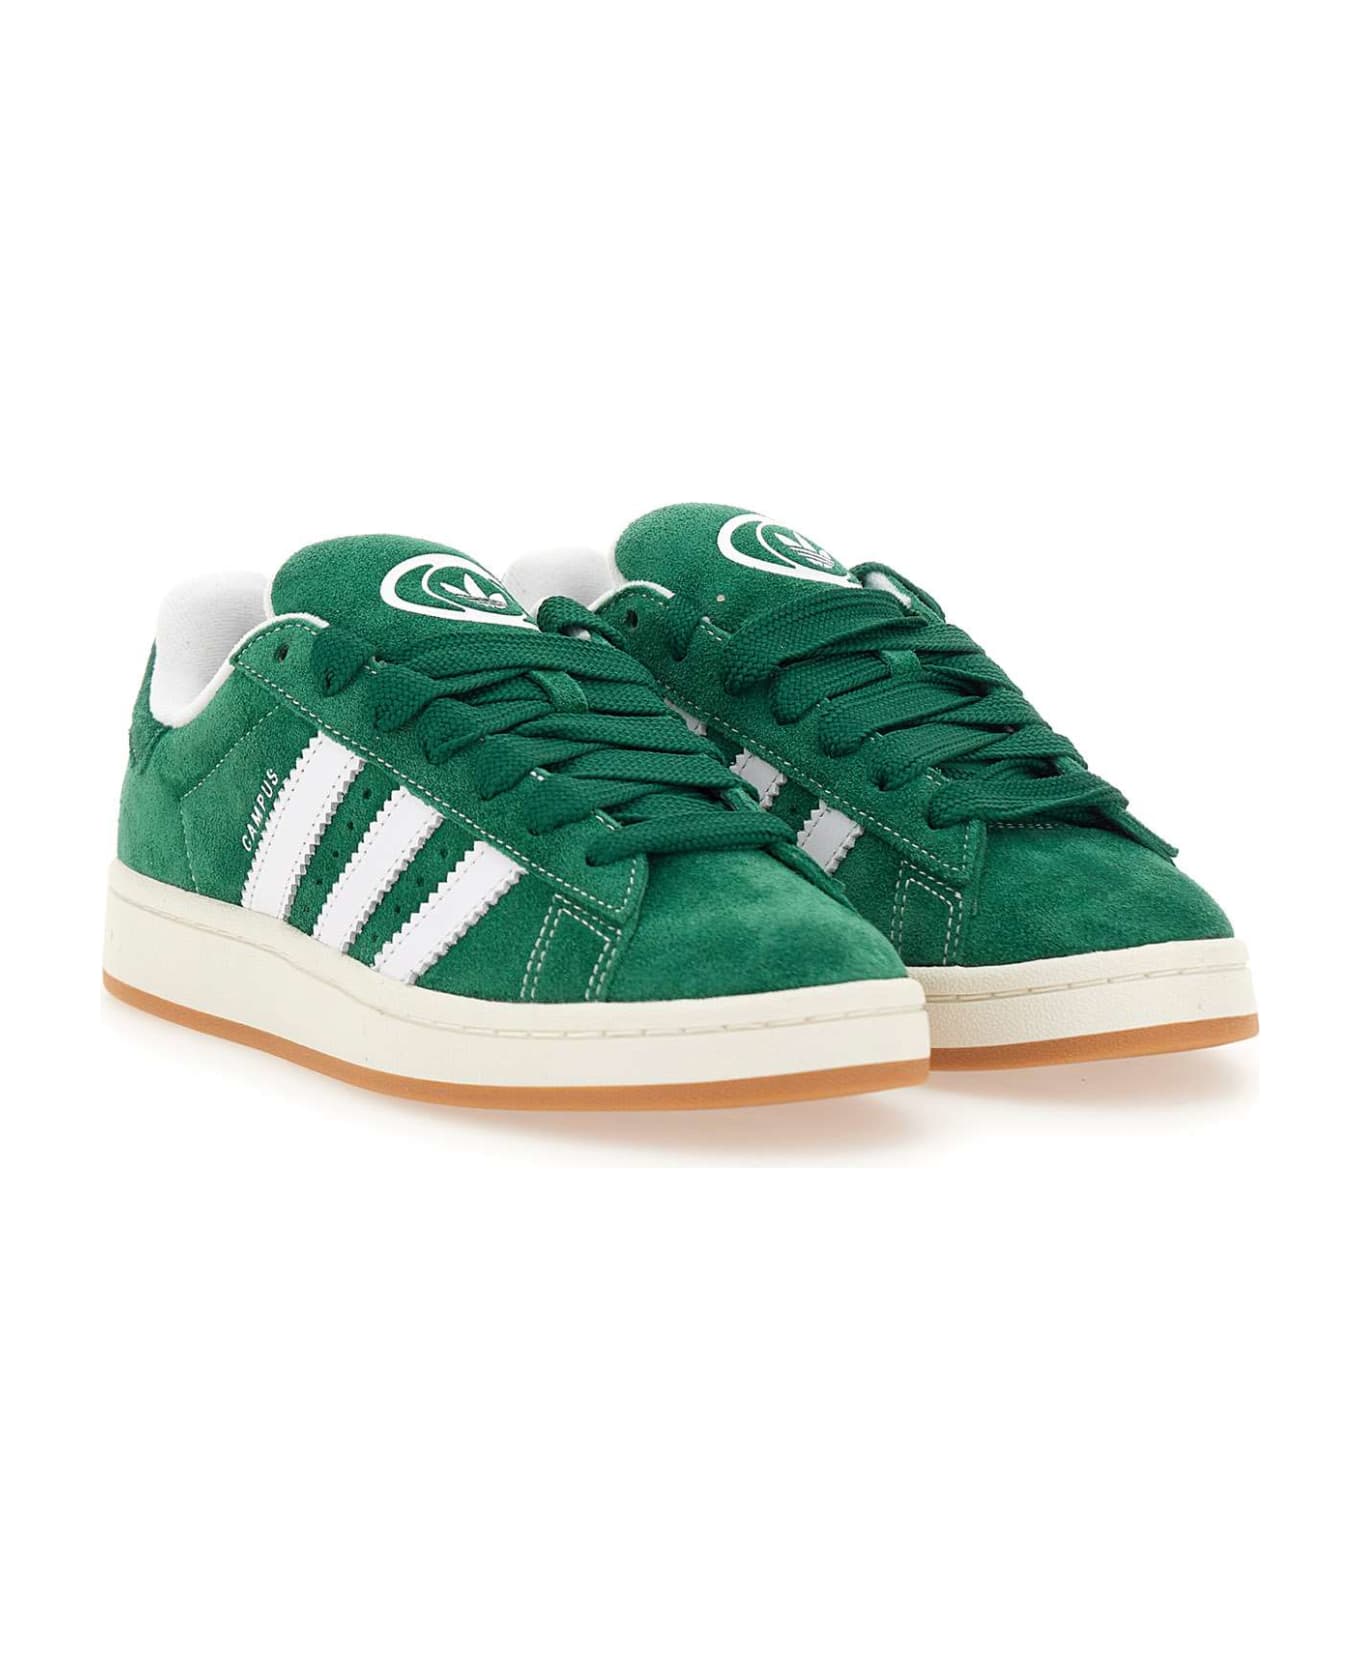 Adidas Campus 00s Sneakers - Drkgrn Ftwwht Owhite